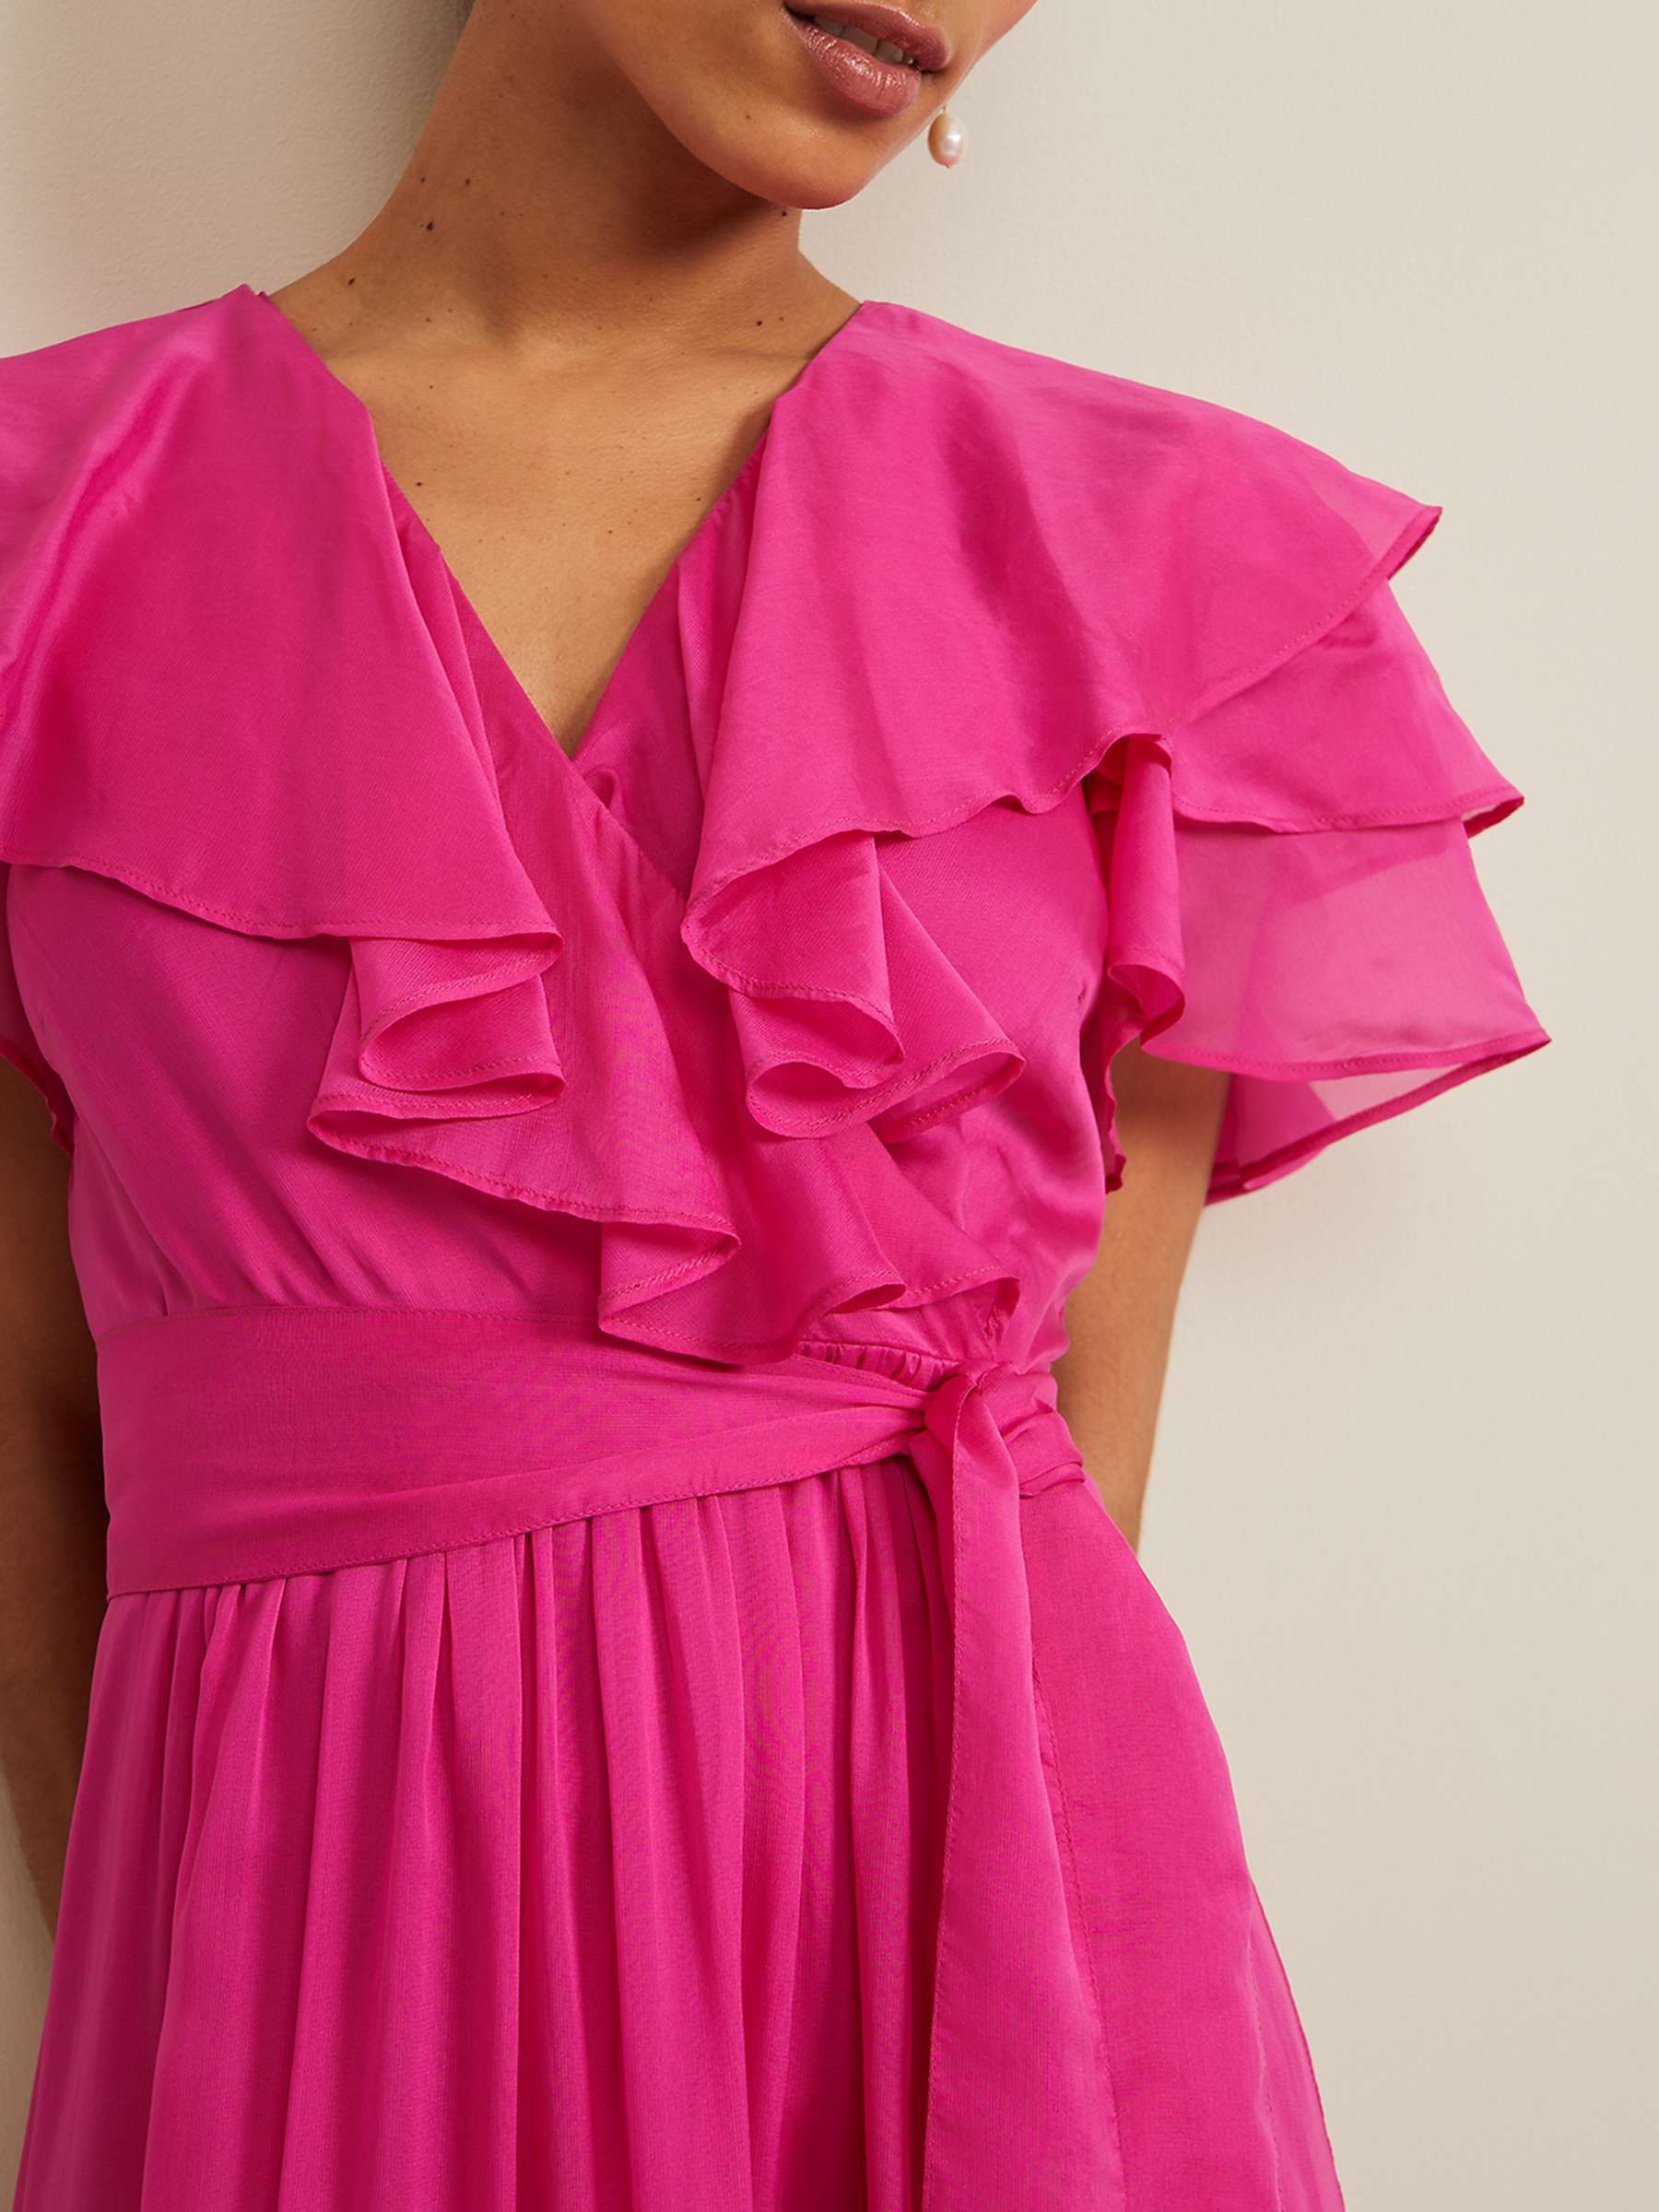 Buy Phase Eight Petite Mabelle Maxi Dress, Fuchsia Online at johnlewis.com